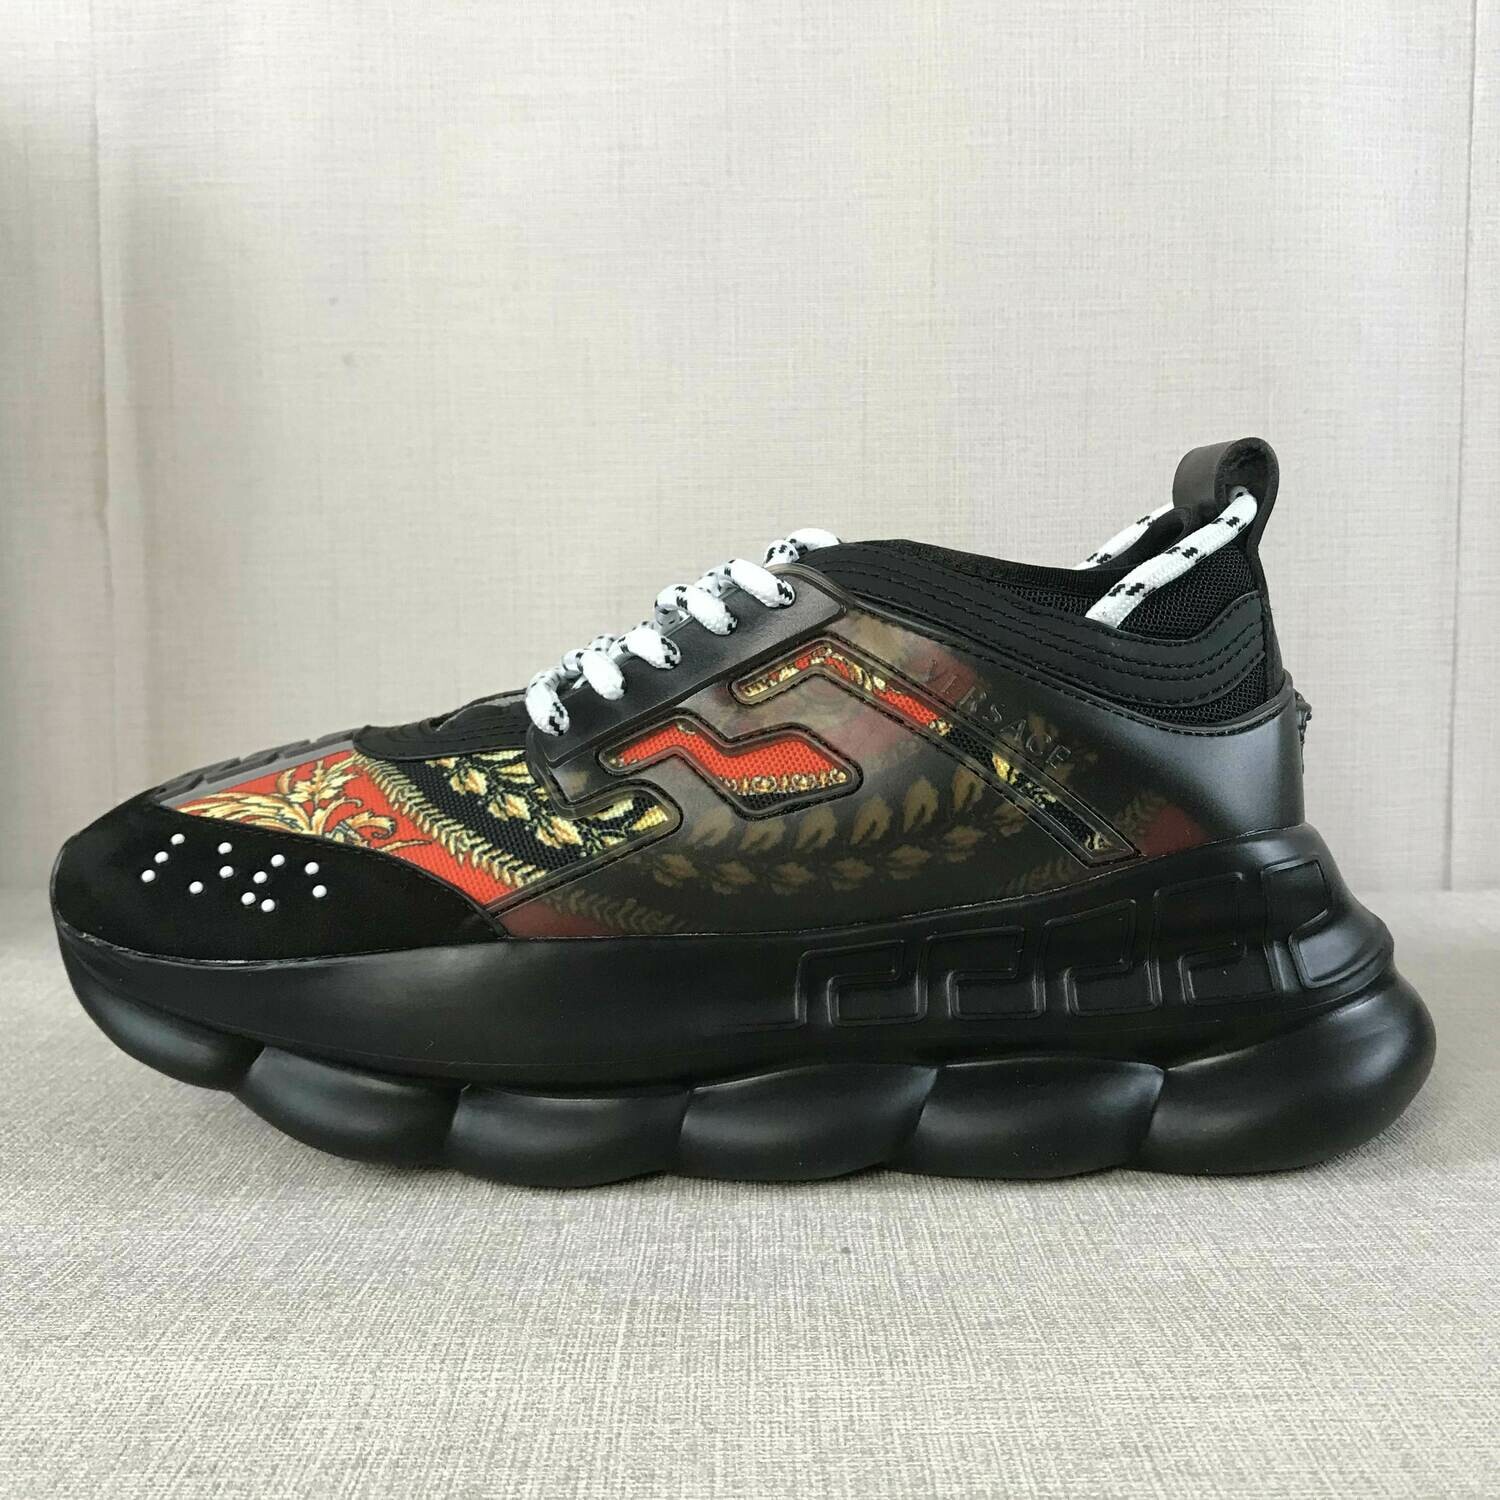 SNEAKERS VERSACE CHAIN REACTION NERO/ROSSO